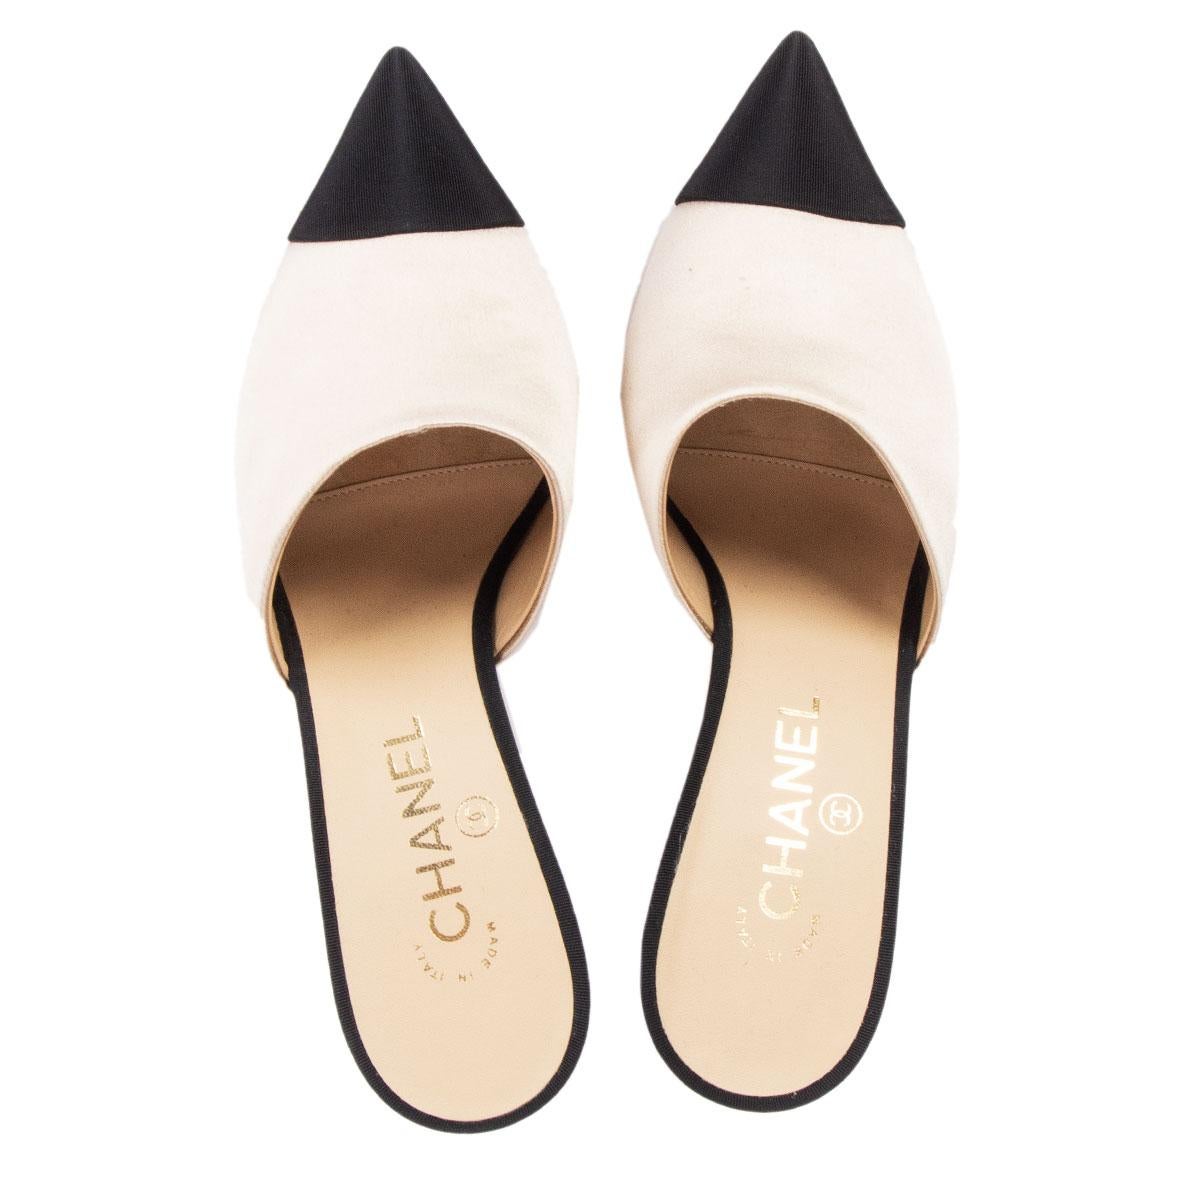 chanel pearl mules